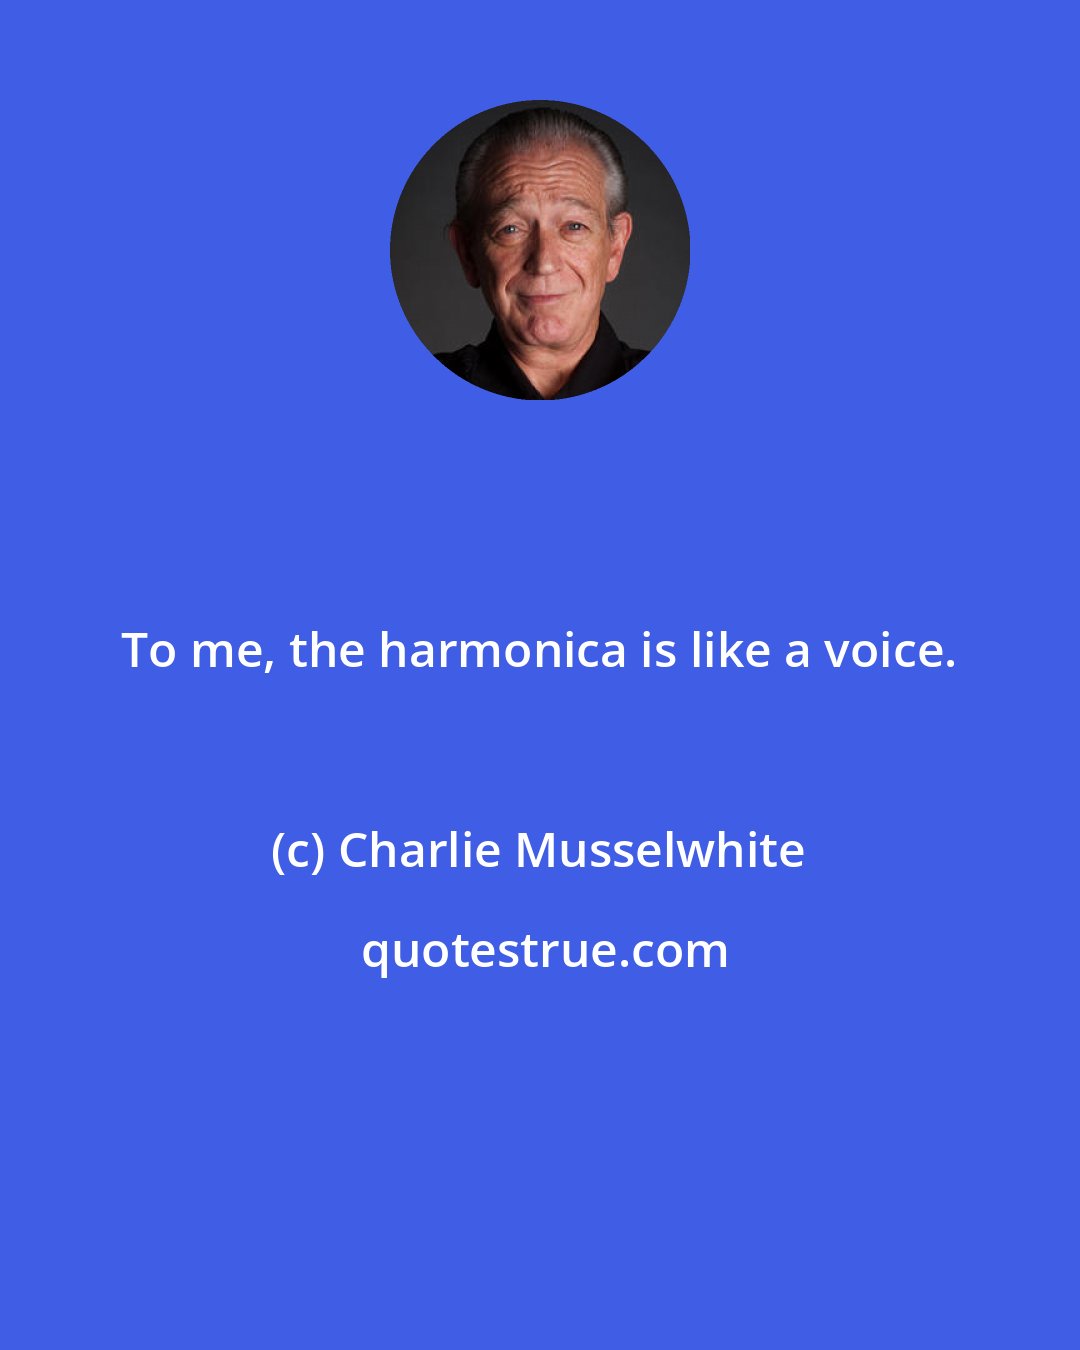 Charlie Musselwhite: To me, the harmonica is like a voice.